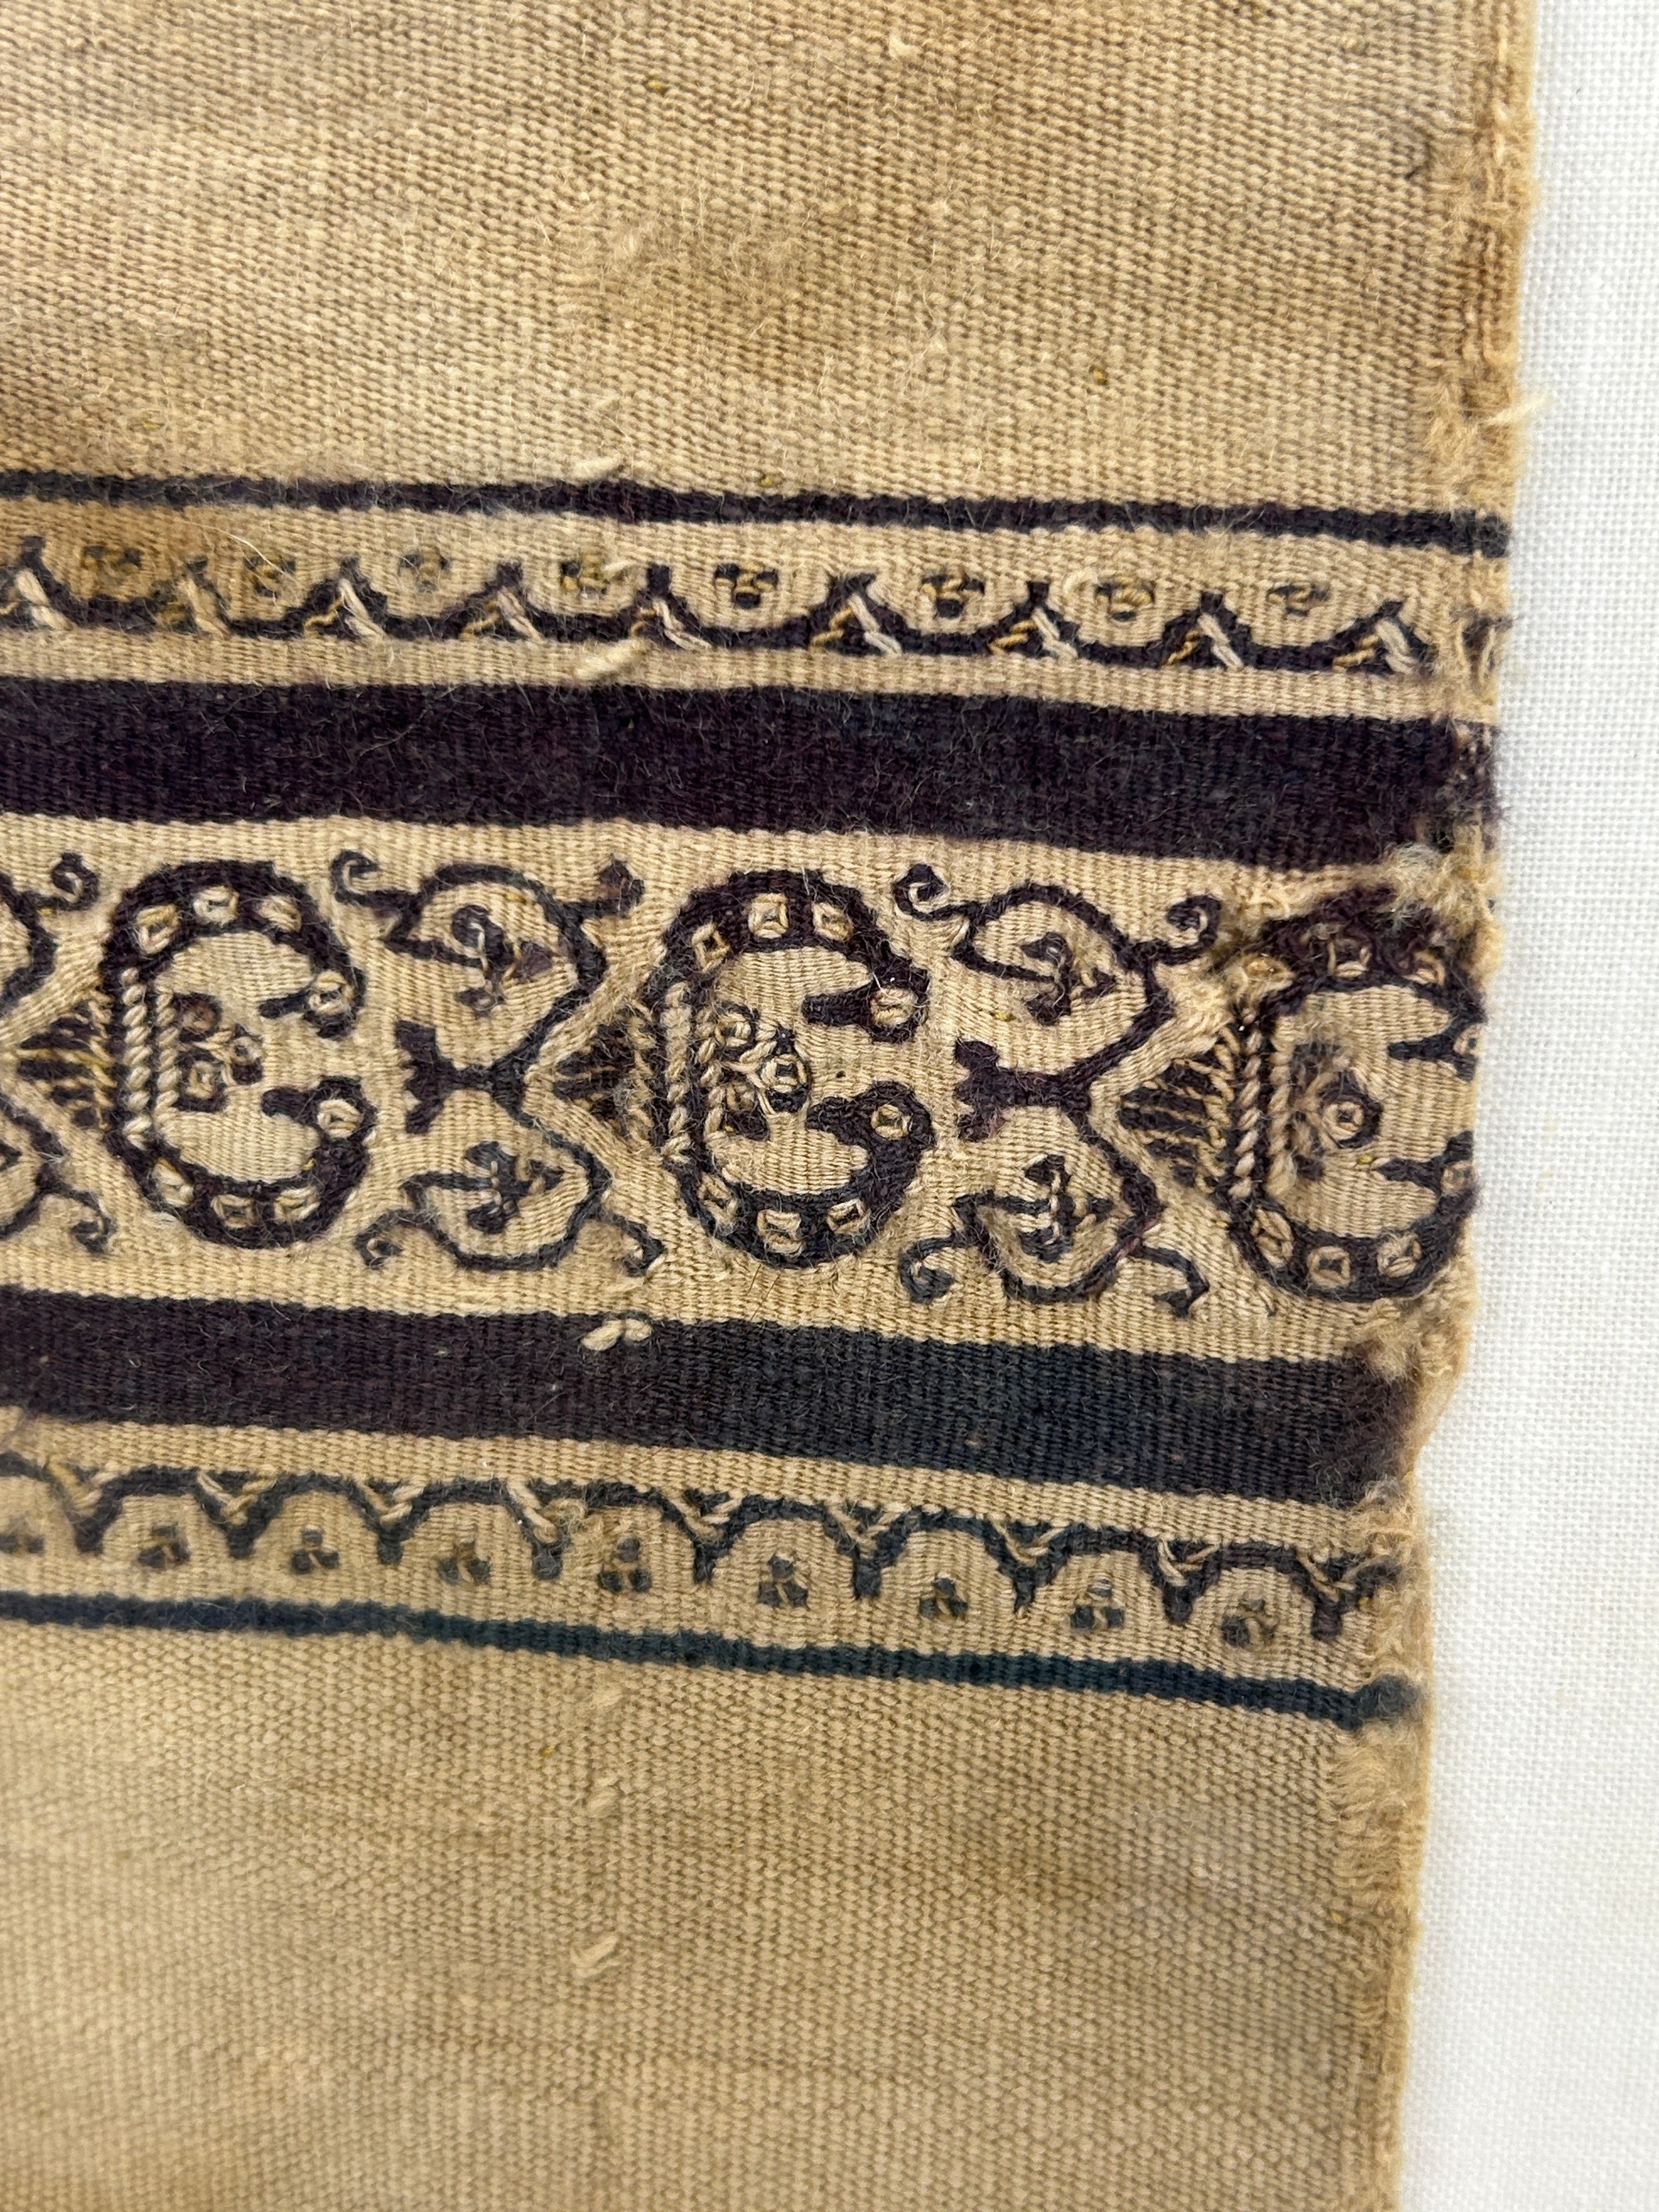 A COPTIC LINEN AND WOOL TEXTILE CIRCA 5TH-8TH CENTURY A.D. For similar see Bonhams Lot 330, ' - Image 4 of 10